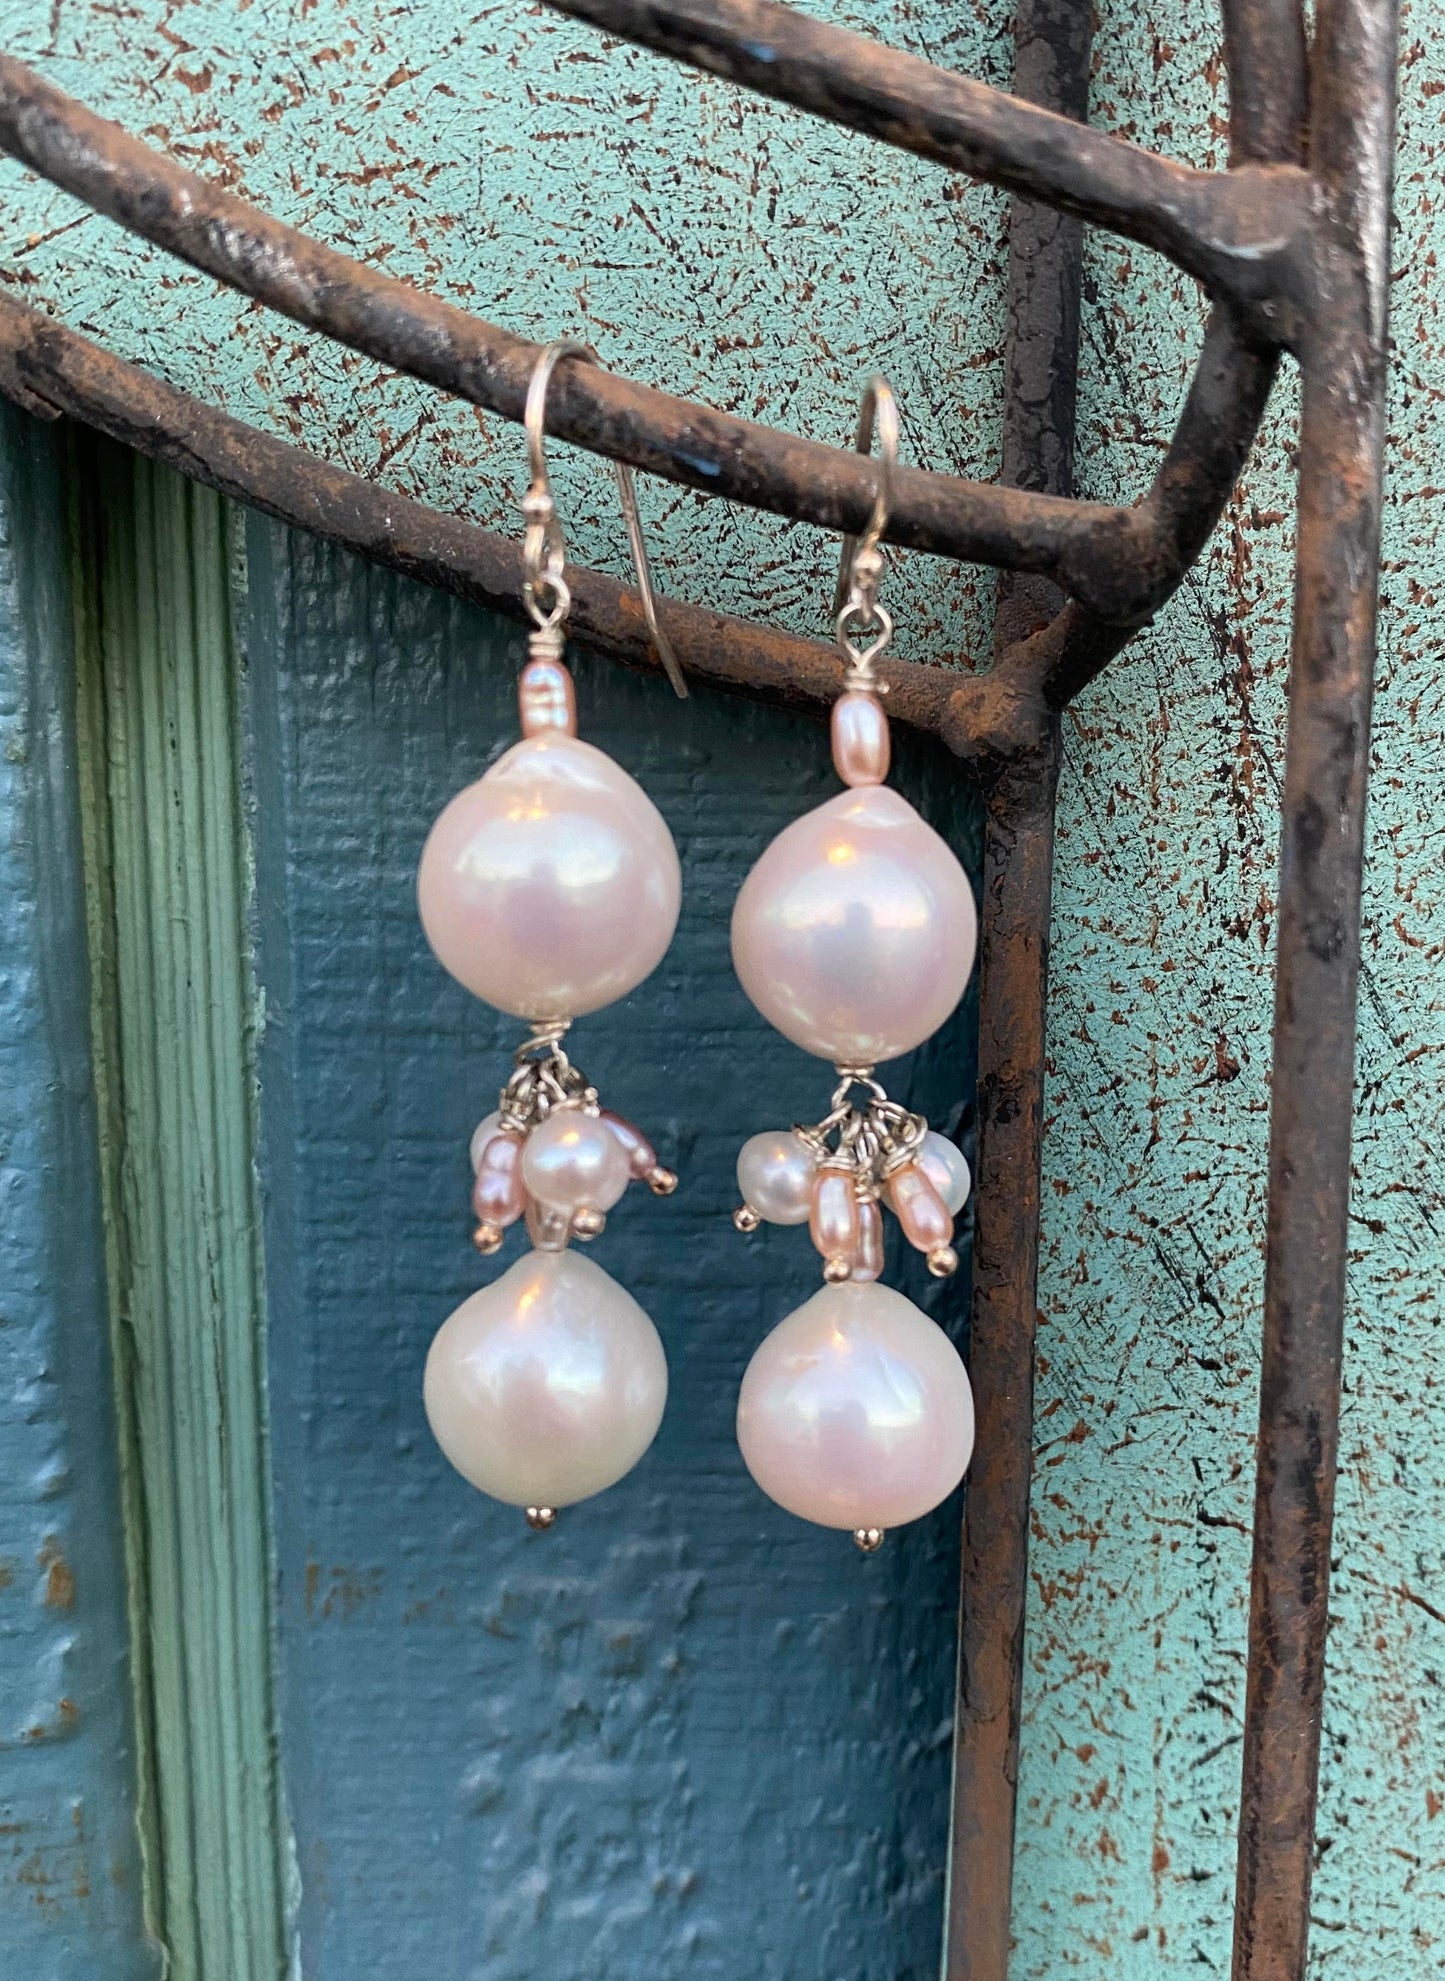 Luscious 11mm White Japanese Akoya Pearl Earrings with White and pale Pink Freshwater Cluster on Sterling Silver Wires